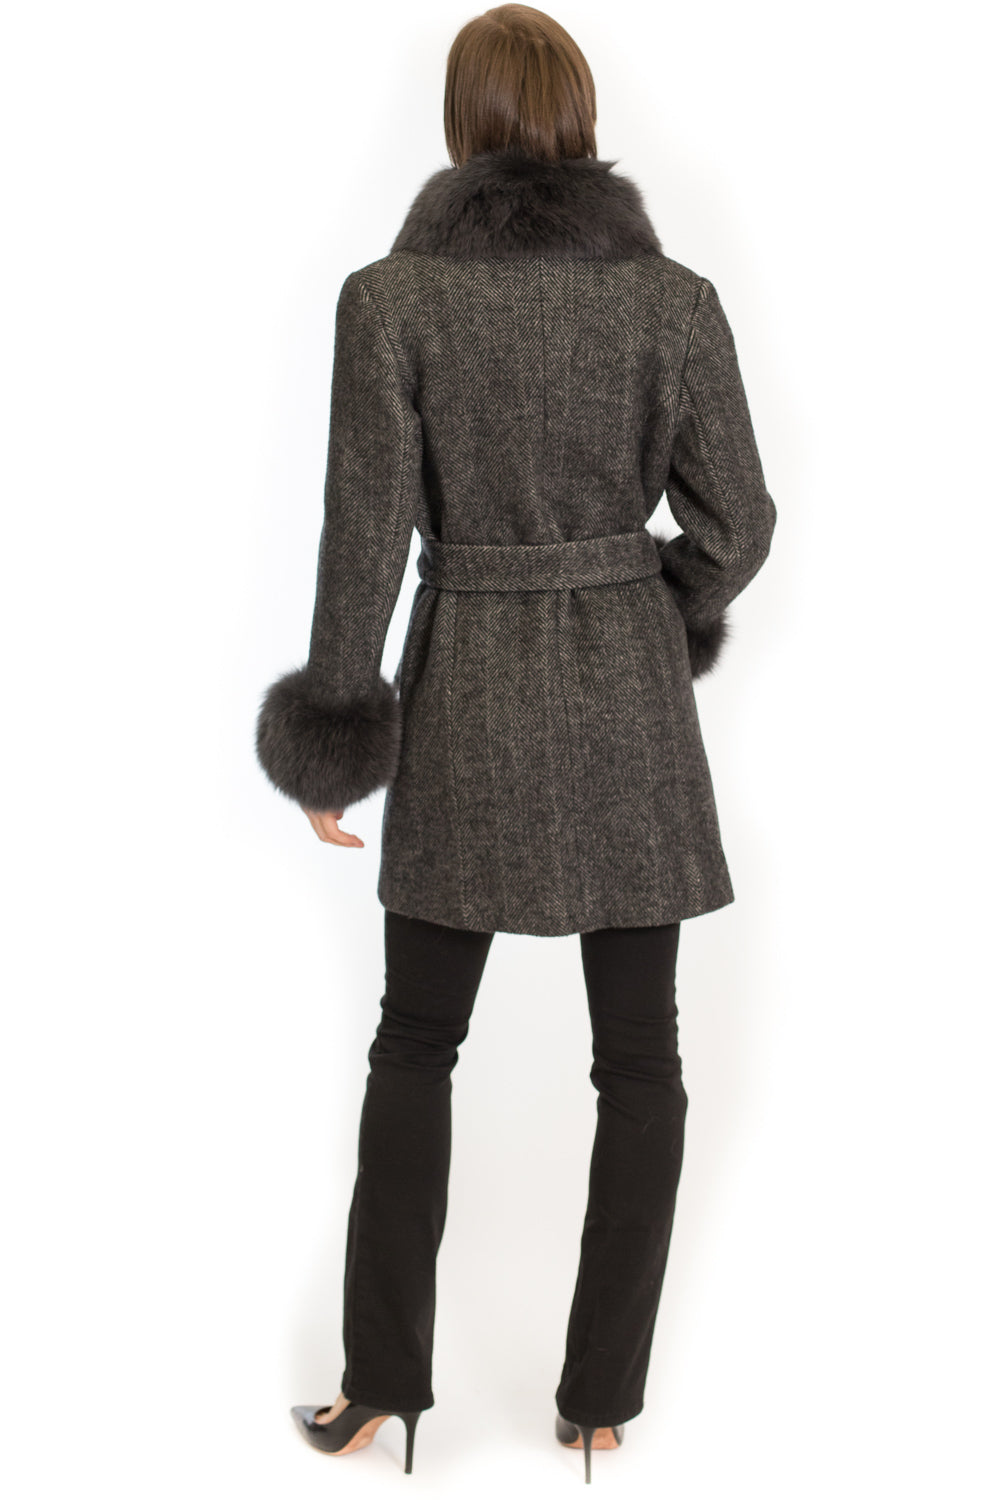 FRR October Wool Wrap Coat with Fox Fur Trim in Stone